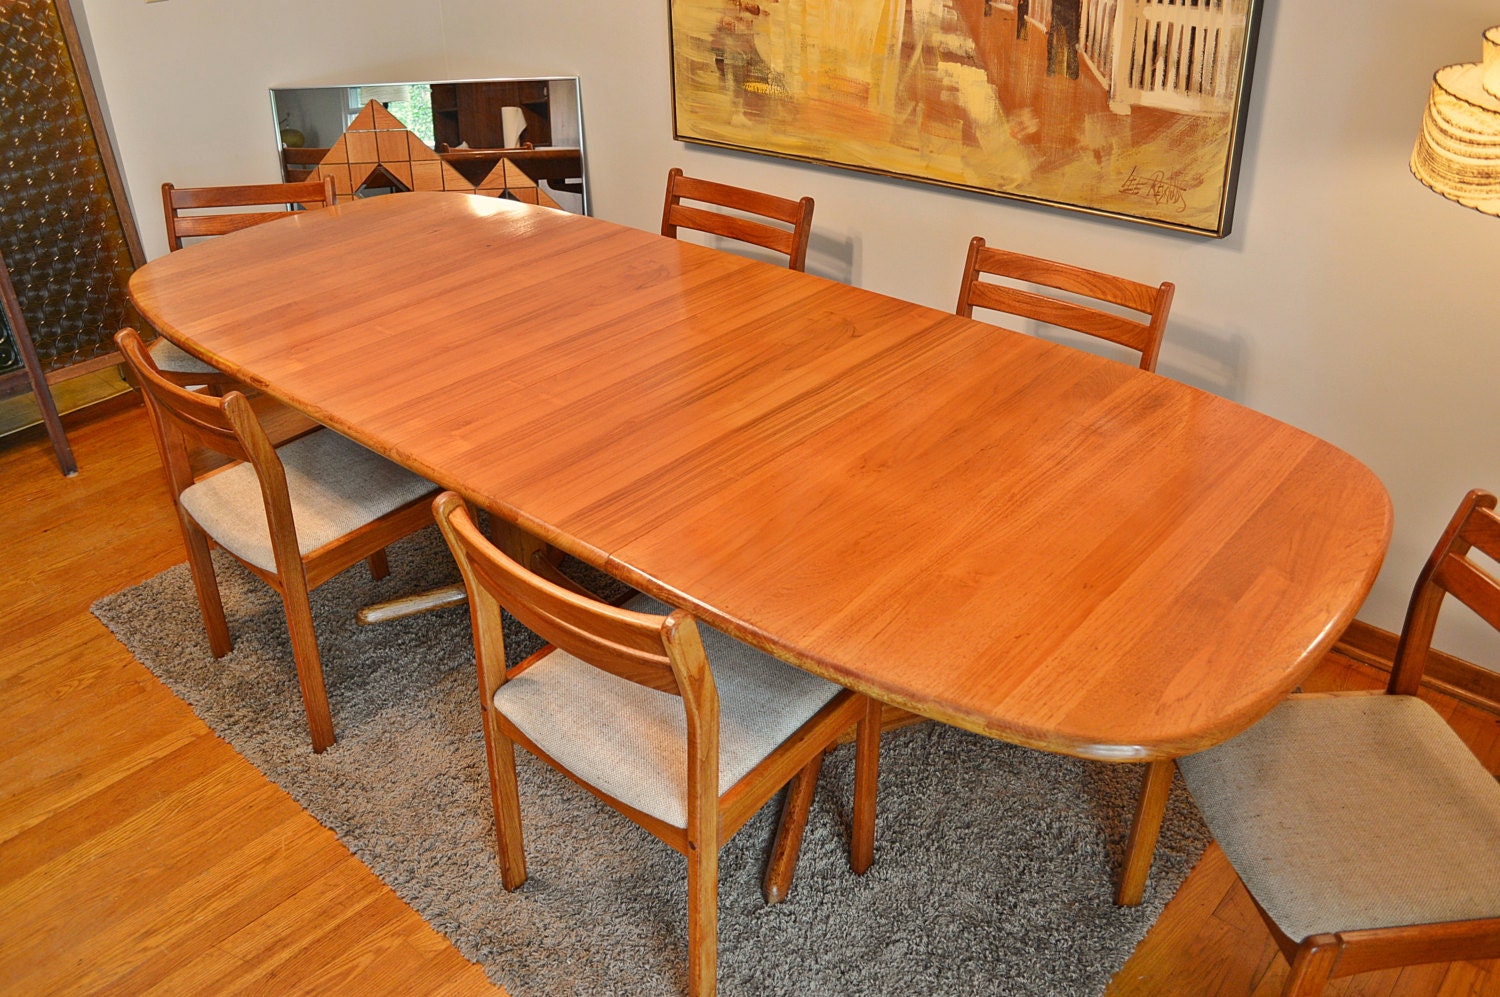 Teak Indoor Dining Room Table And Chairs